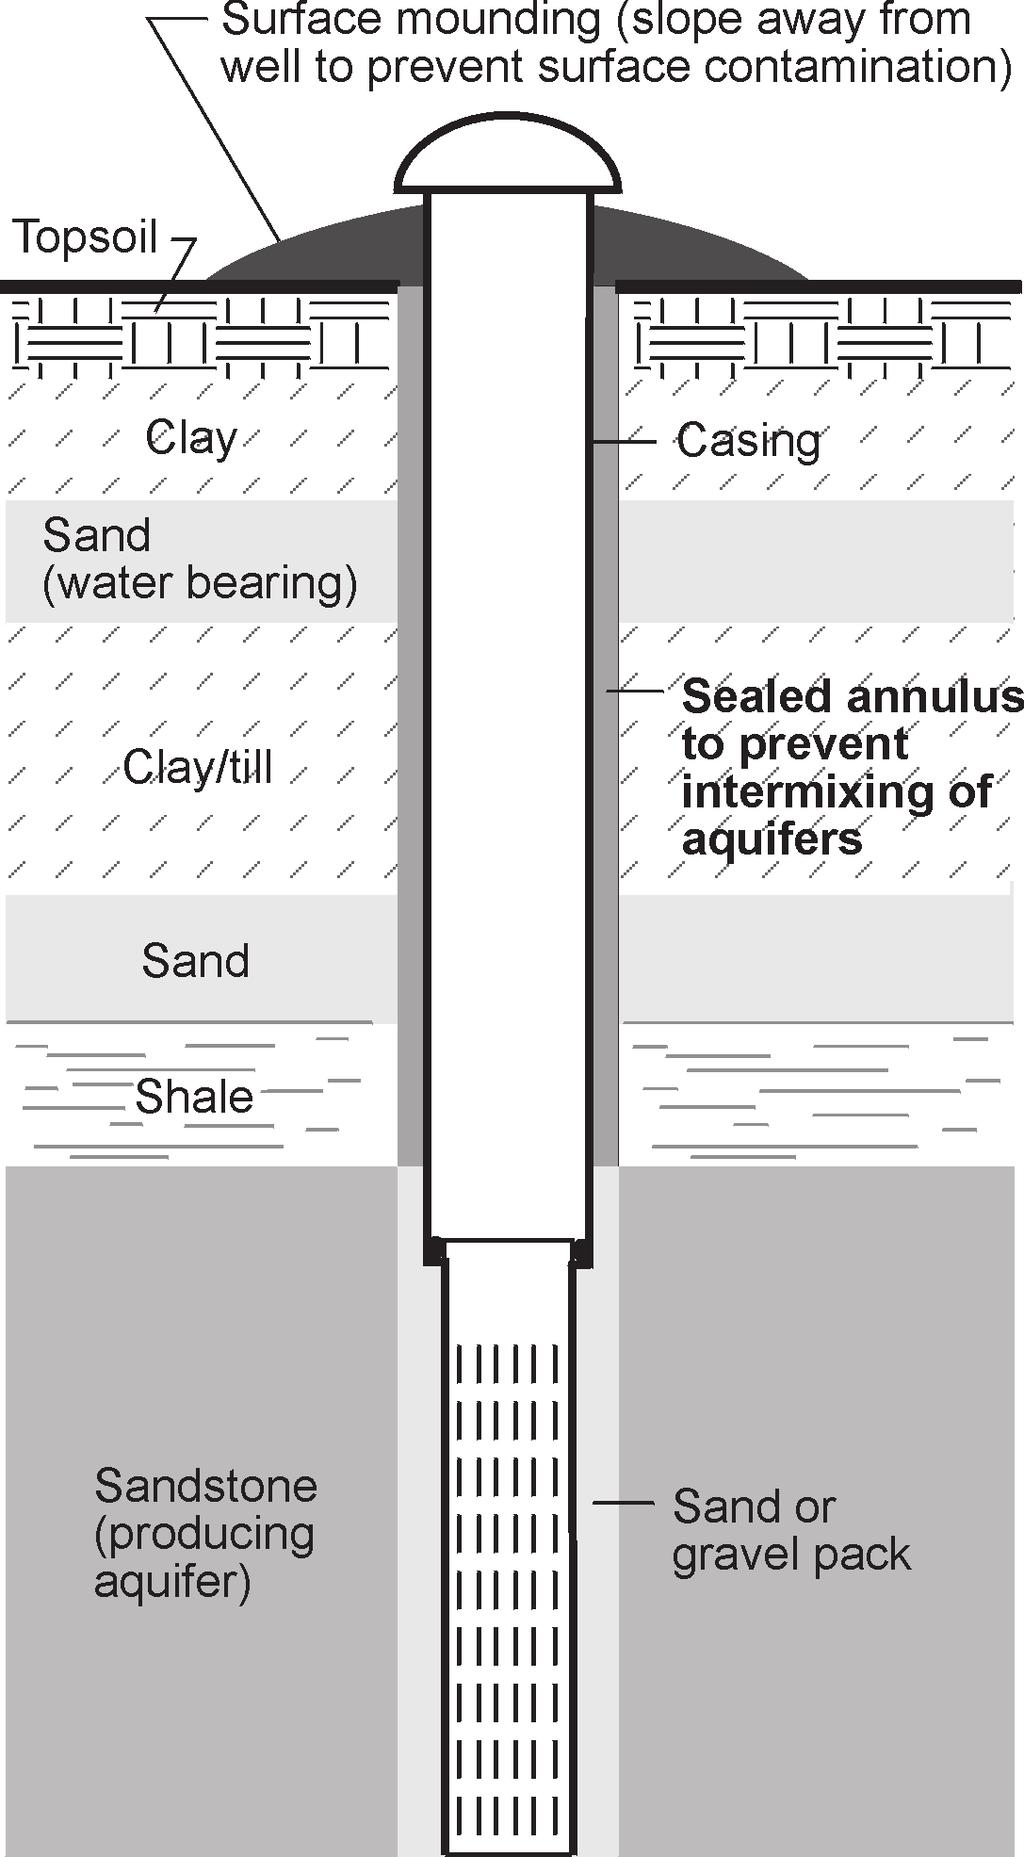 water to enter the well at a slower rate, causing a lower drop in pressure as the water moves into the well.